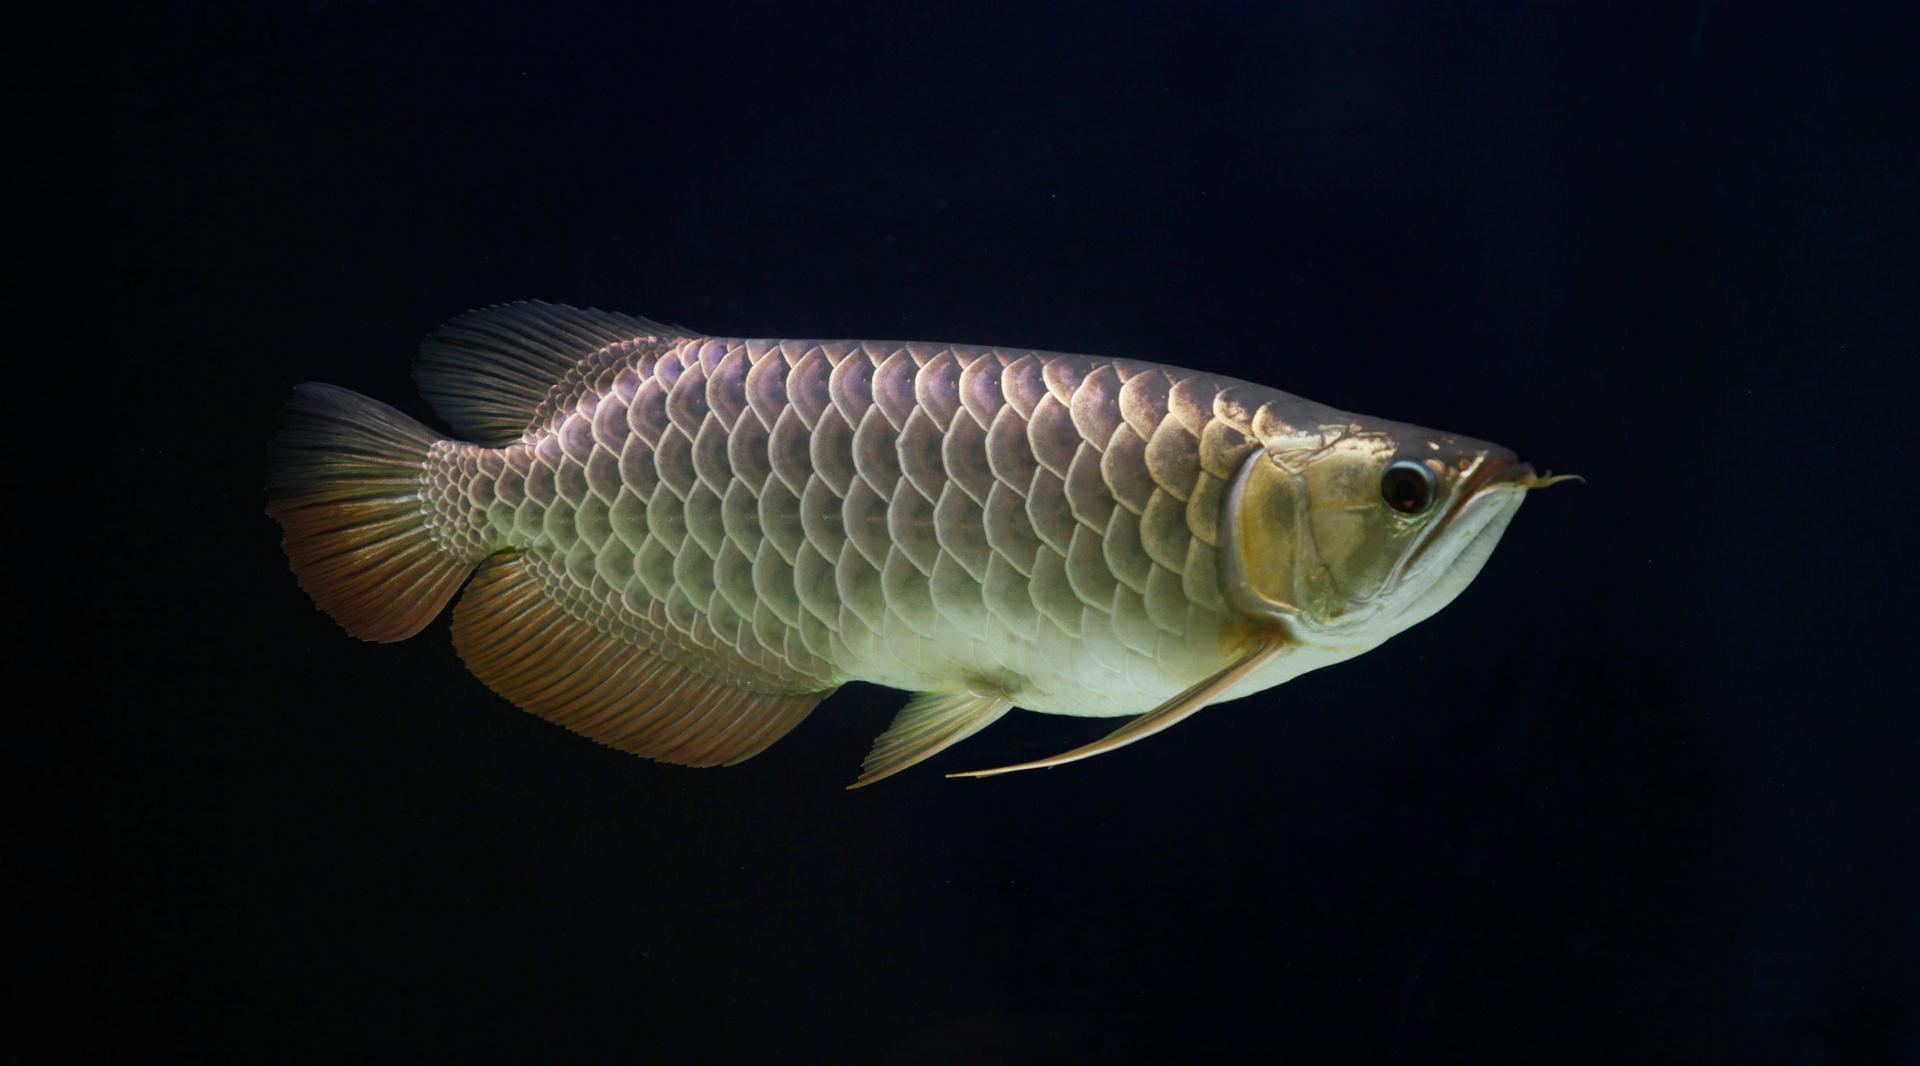 A Sapphire Golden Arowana, named "Long Zai" or "Little Dragon" in Cantonese, swims in its tank at its owner's residence in Kajang outside Kuala Lumpur March 5, 2012. Known for its agile body, sleek shiny scales and the "whiskers" that give it a resemblanc